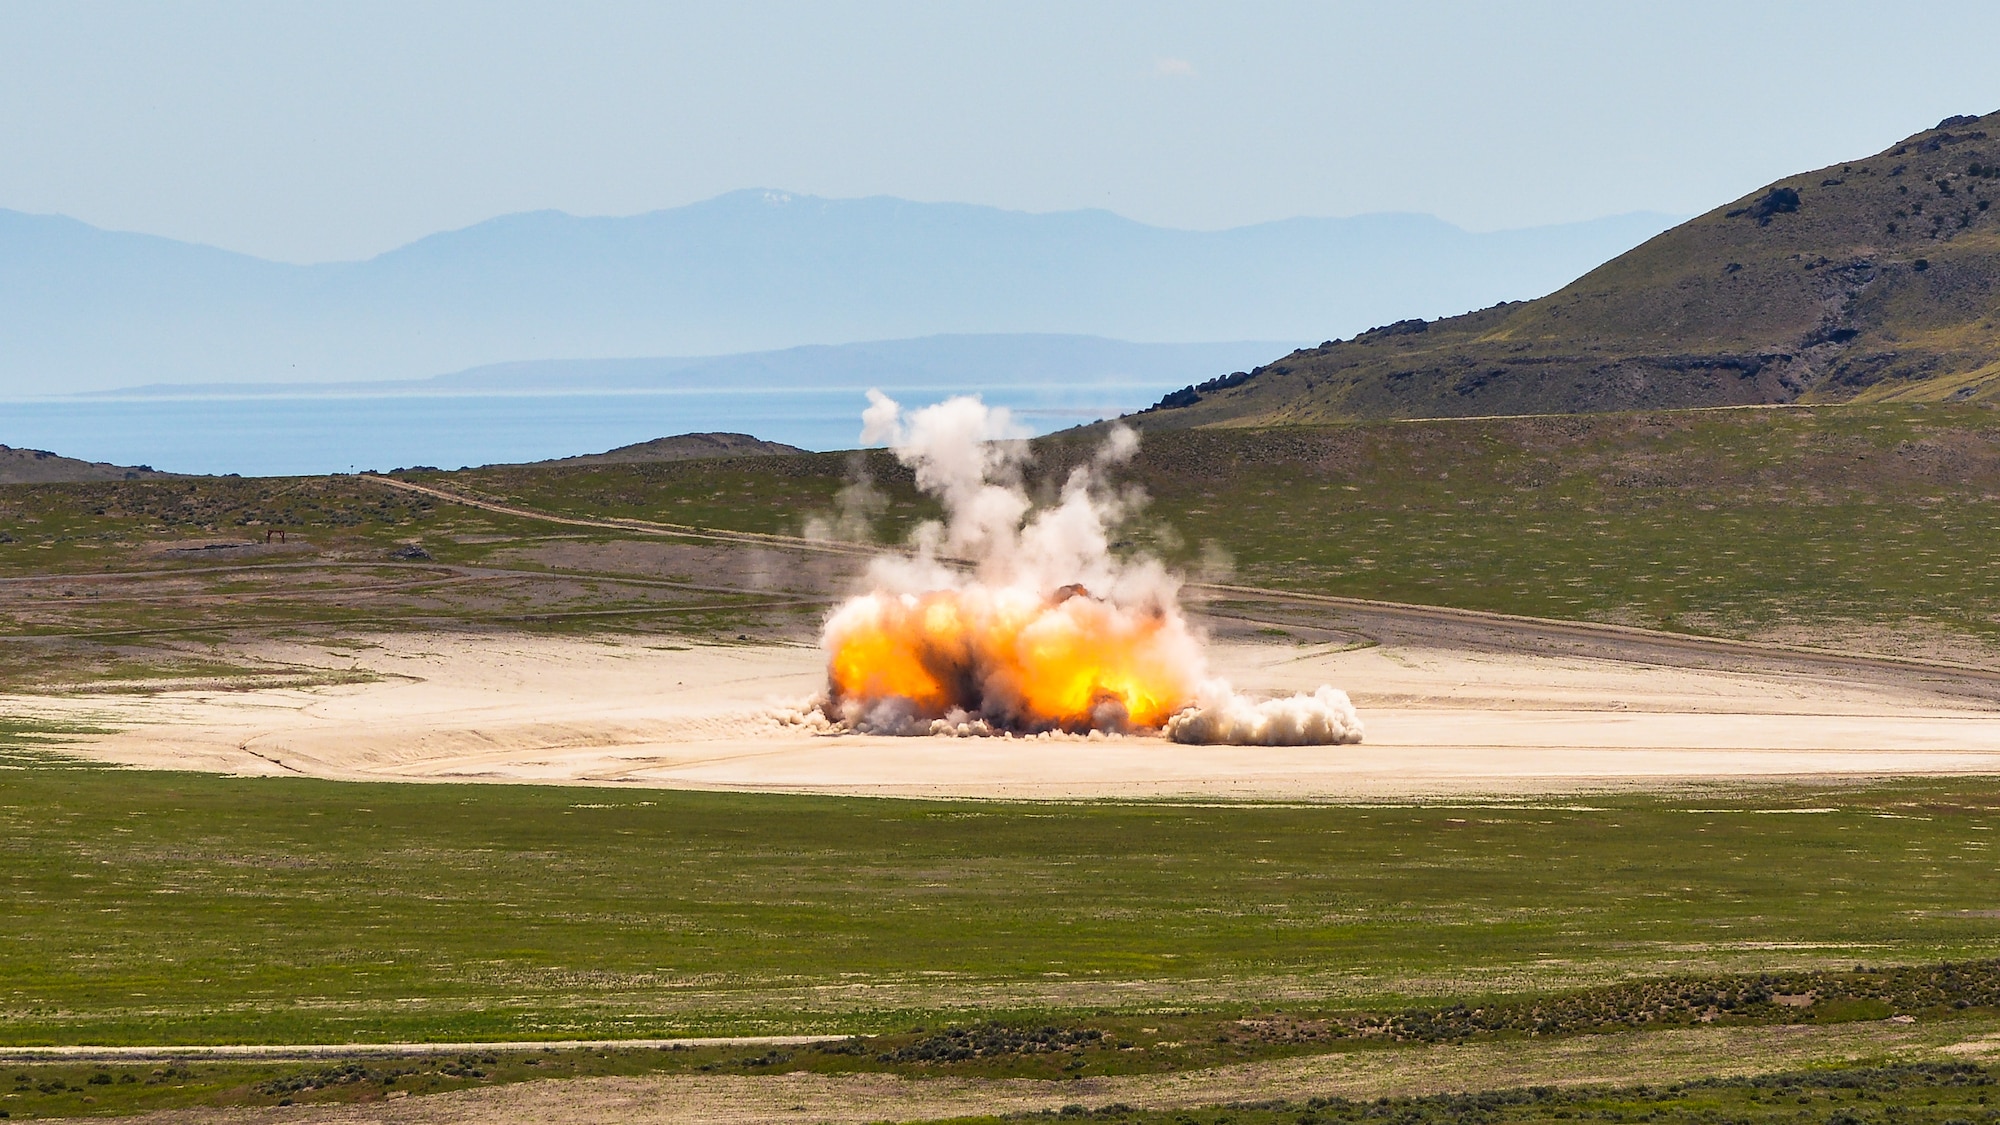 The Air Force detonates a solid-rocket motor June 2, 2015, at the Utah Test and Training Range in Utah. A series of large detonation operations will begin in early August and last through the end of September 2018 at the range. The destruction of the motors is occurring to eliminate aged propellant, and as part of international treaties to reduce the number of ballistic missiles. (U.S. Air Force photo by R. Nial Bradshaw)